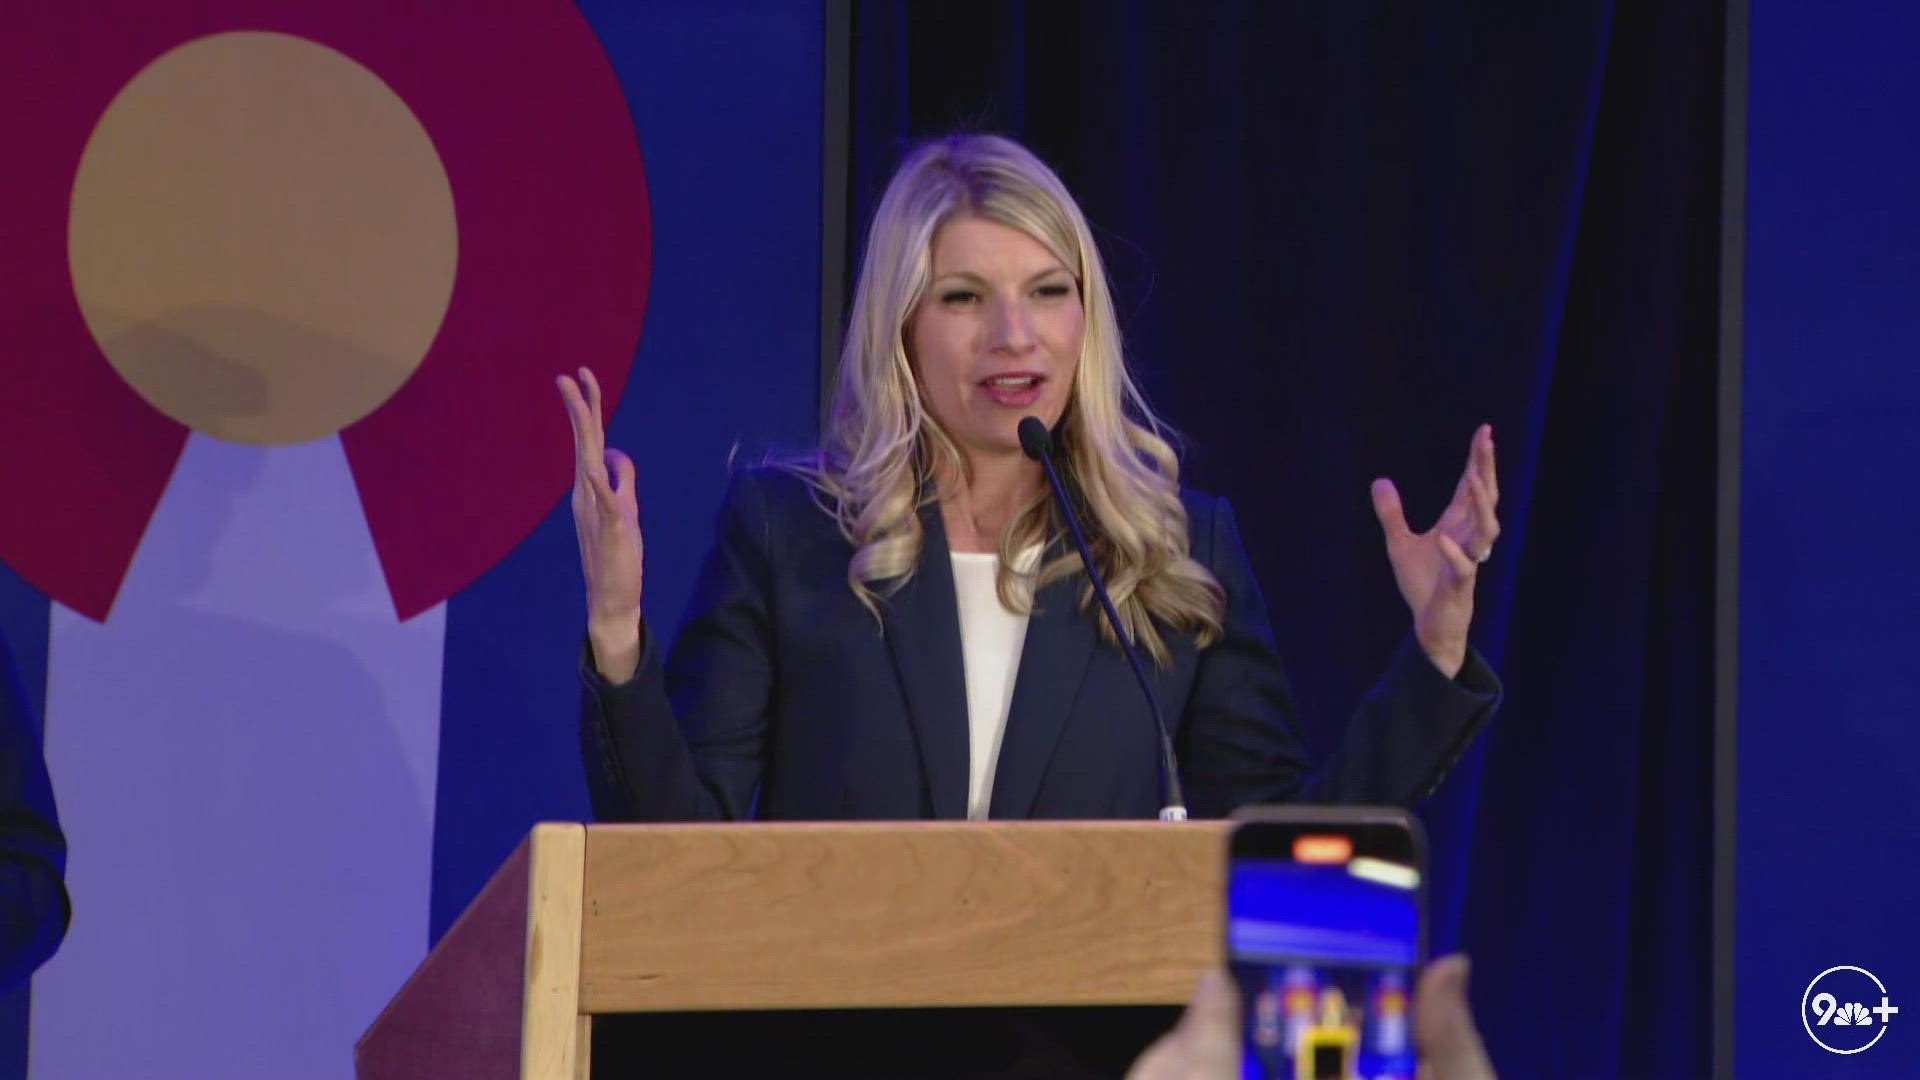 Brittany Pettersen defeated Republican Erik Aadland in the Colorado House district, according to The Associated Press.